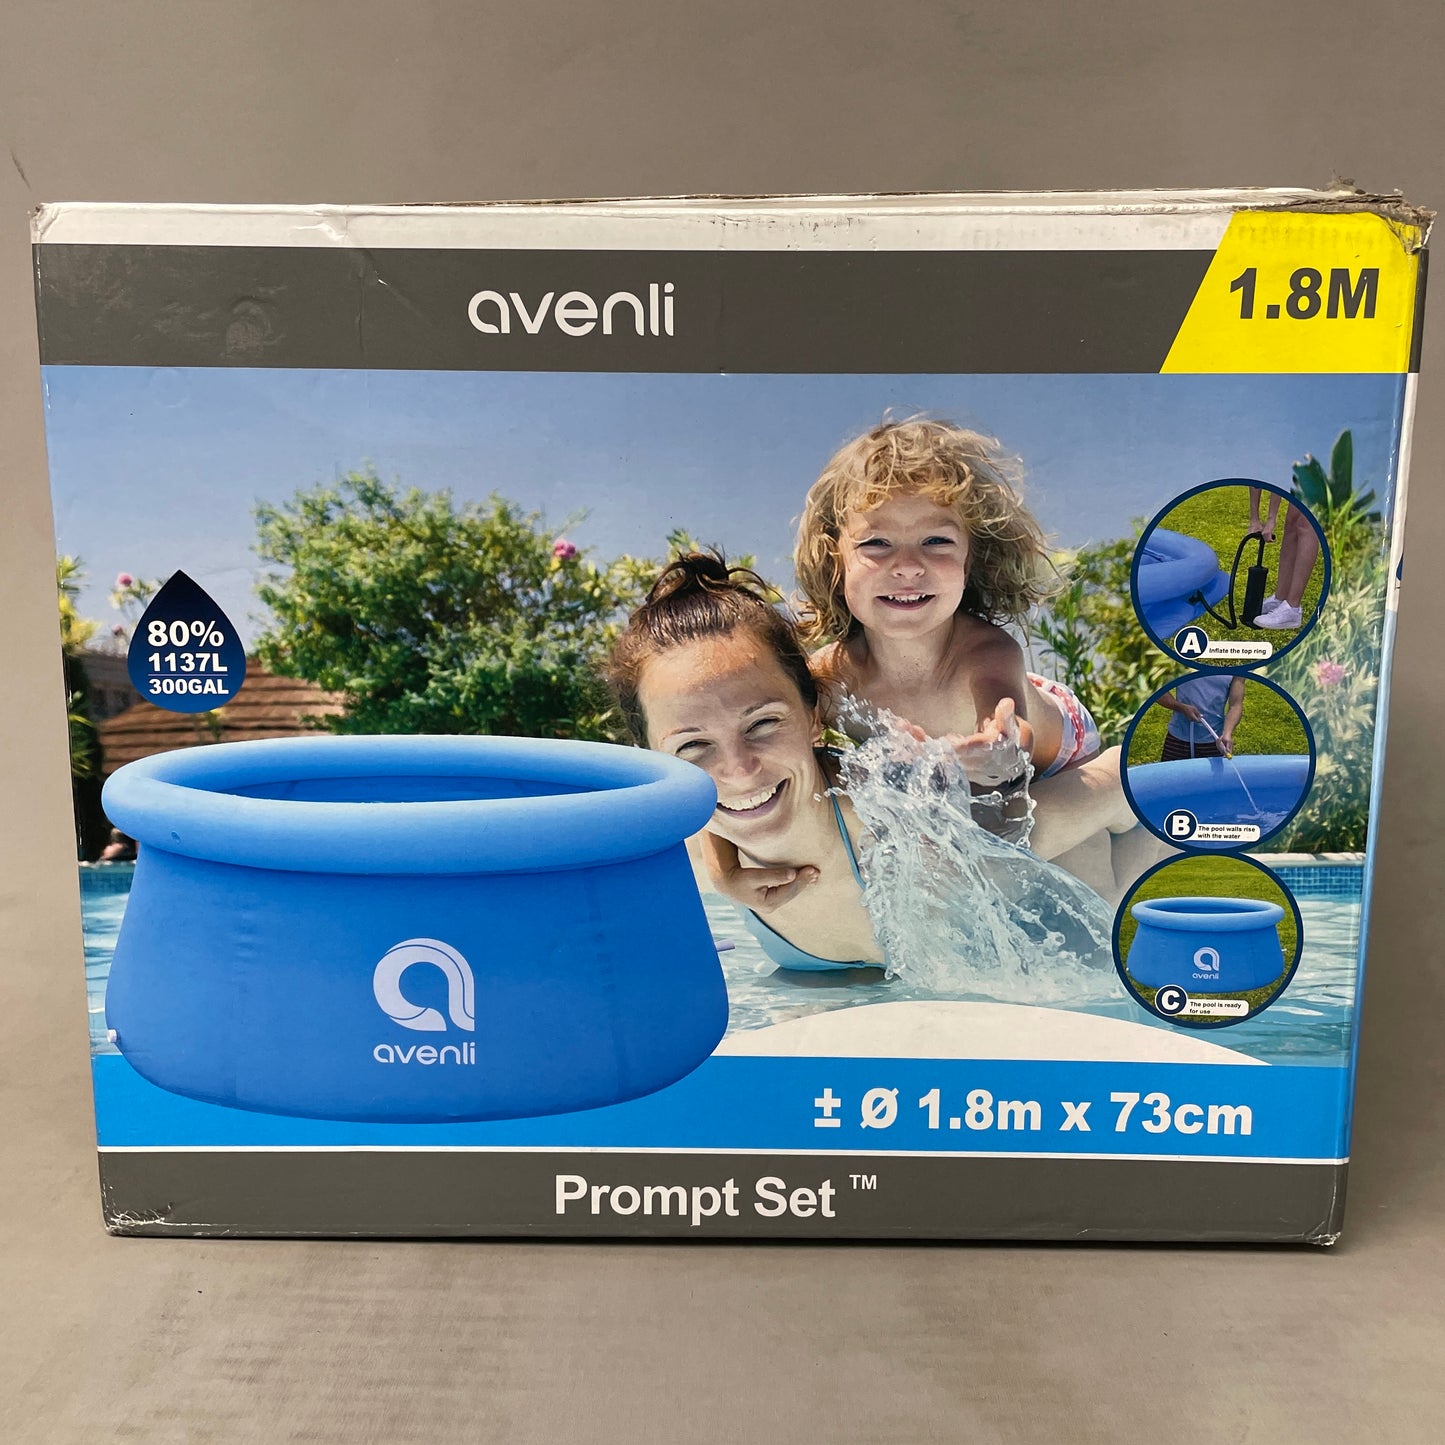 ZA@ AVENLI Inflatable Swimming Pool Prompt Set for Kids, Adults, Toddlers, 300GAL, 41x14x33cm (AS-IS, Used Open/Damaged-Box)